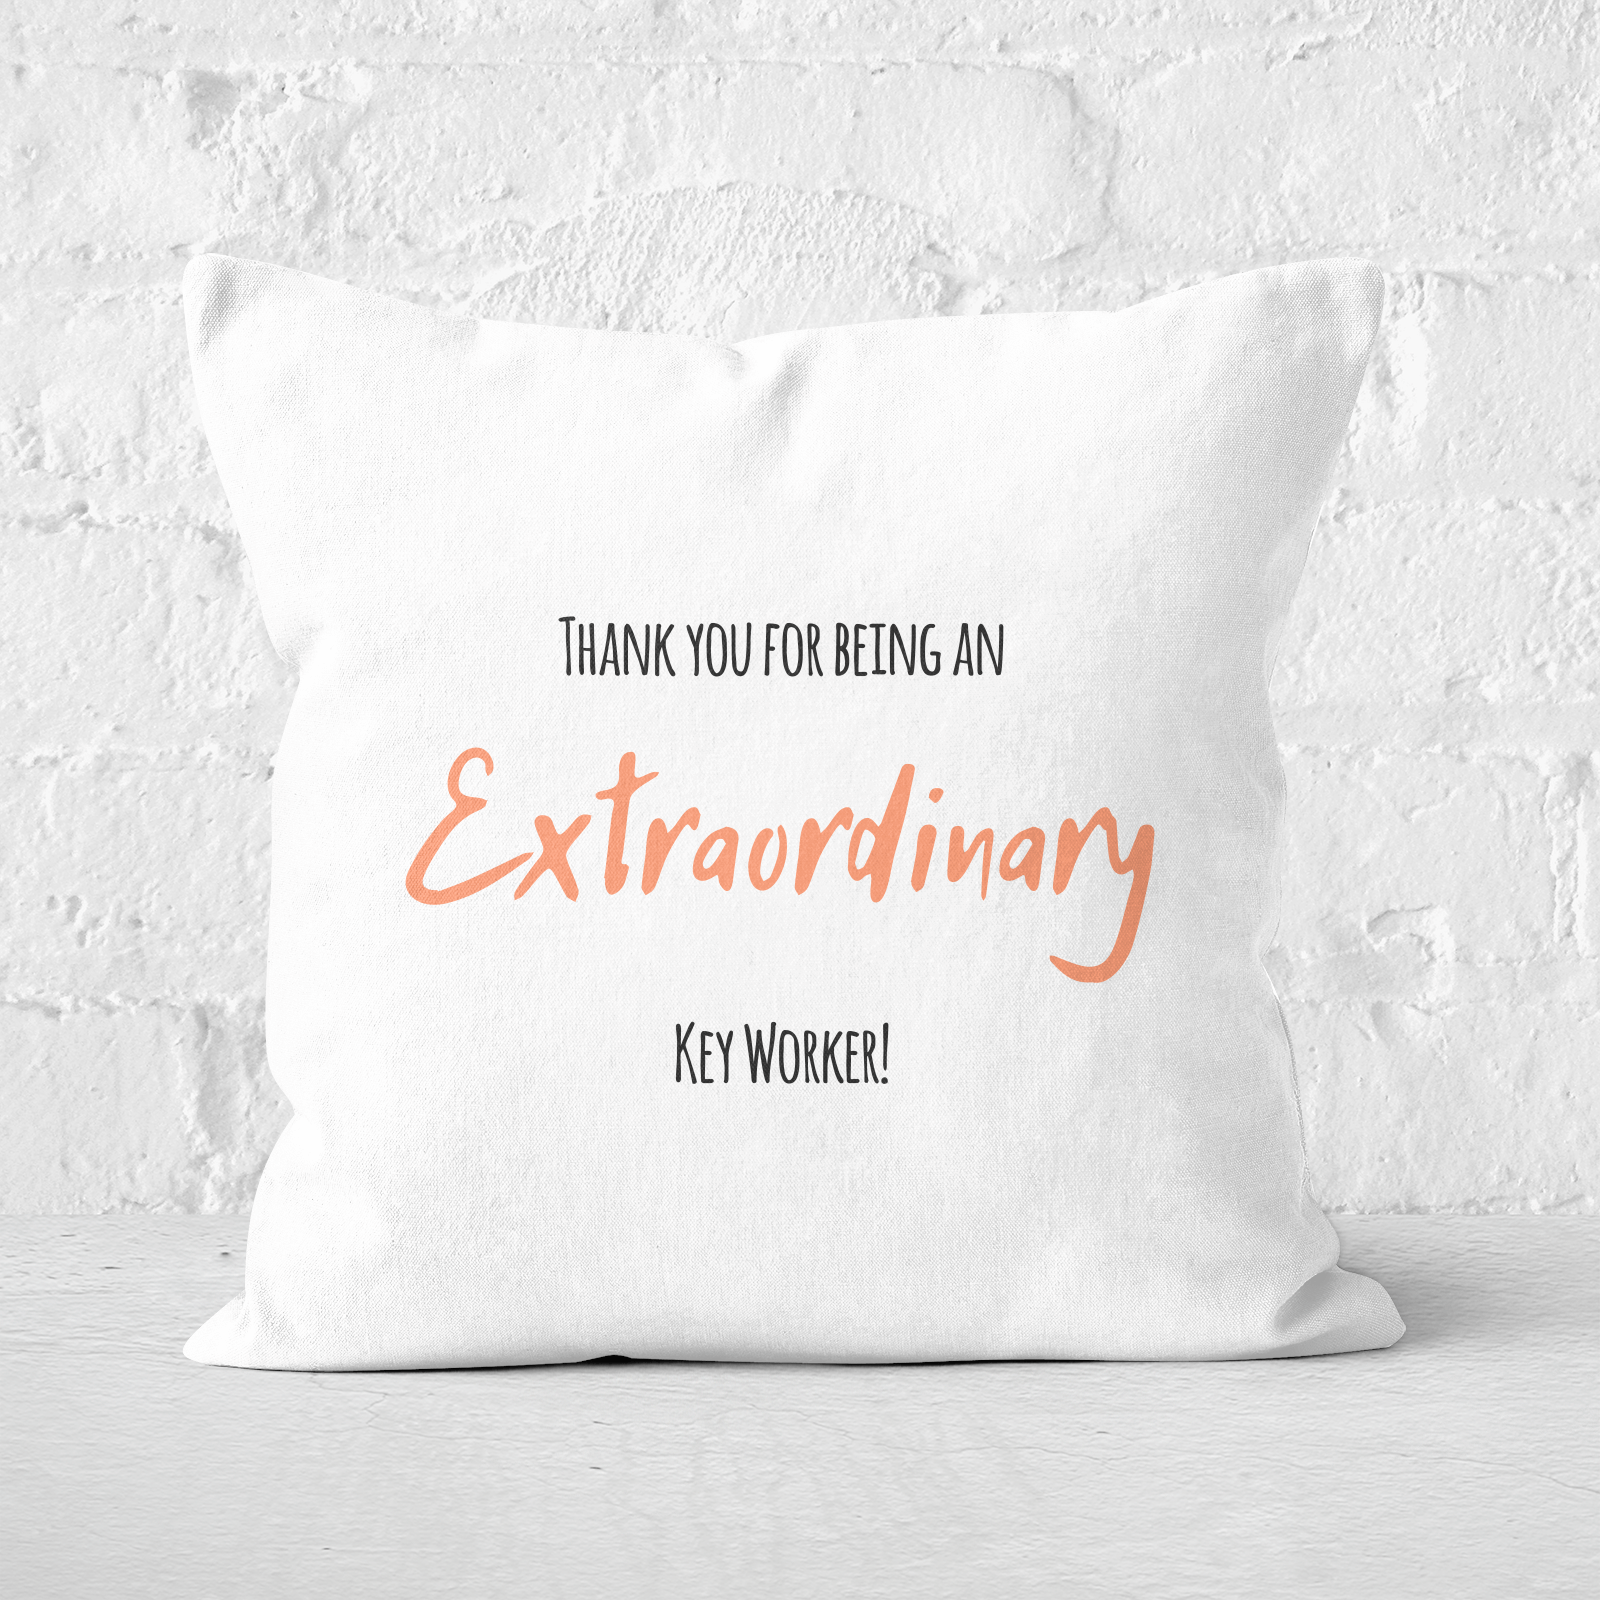 Thank You For Being An Extraordinary Key Worker! Square Cushion - 60x60cm - Soft Touch